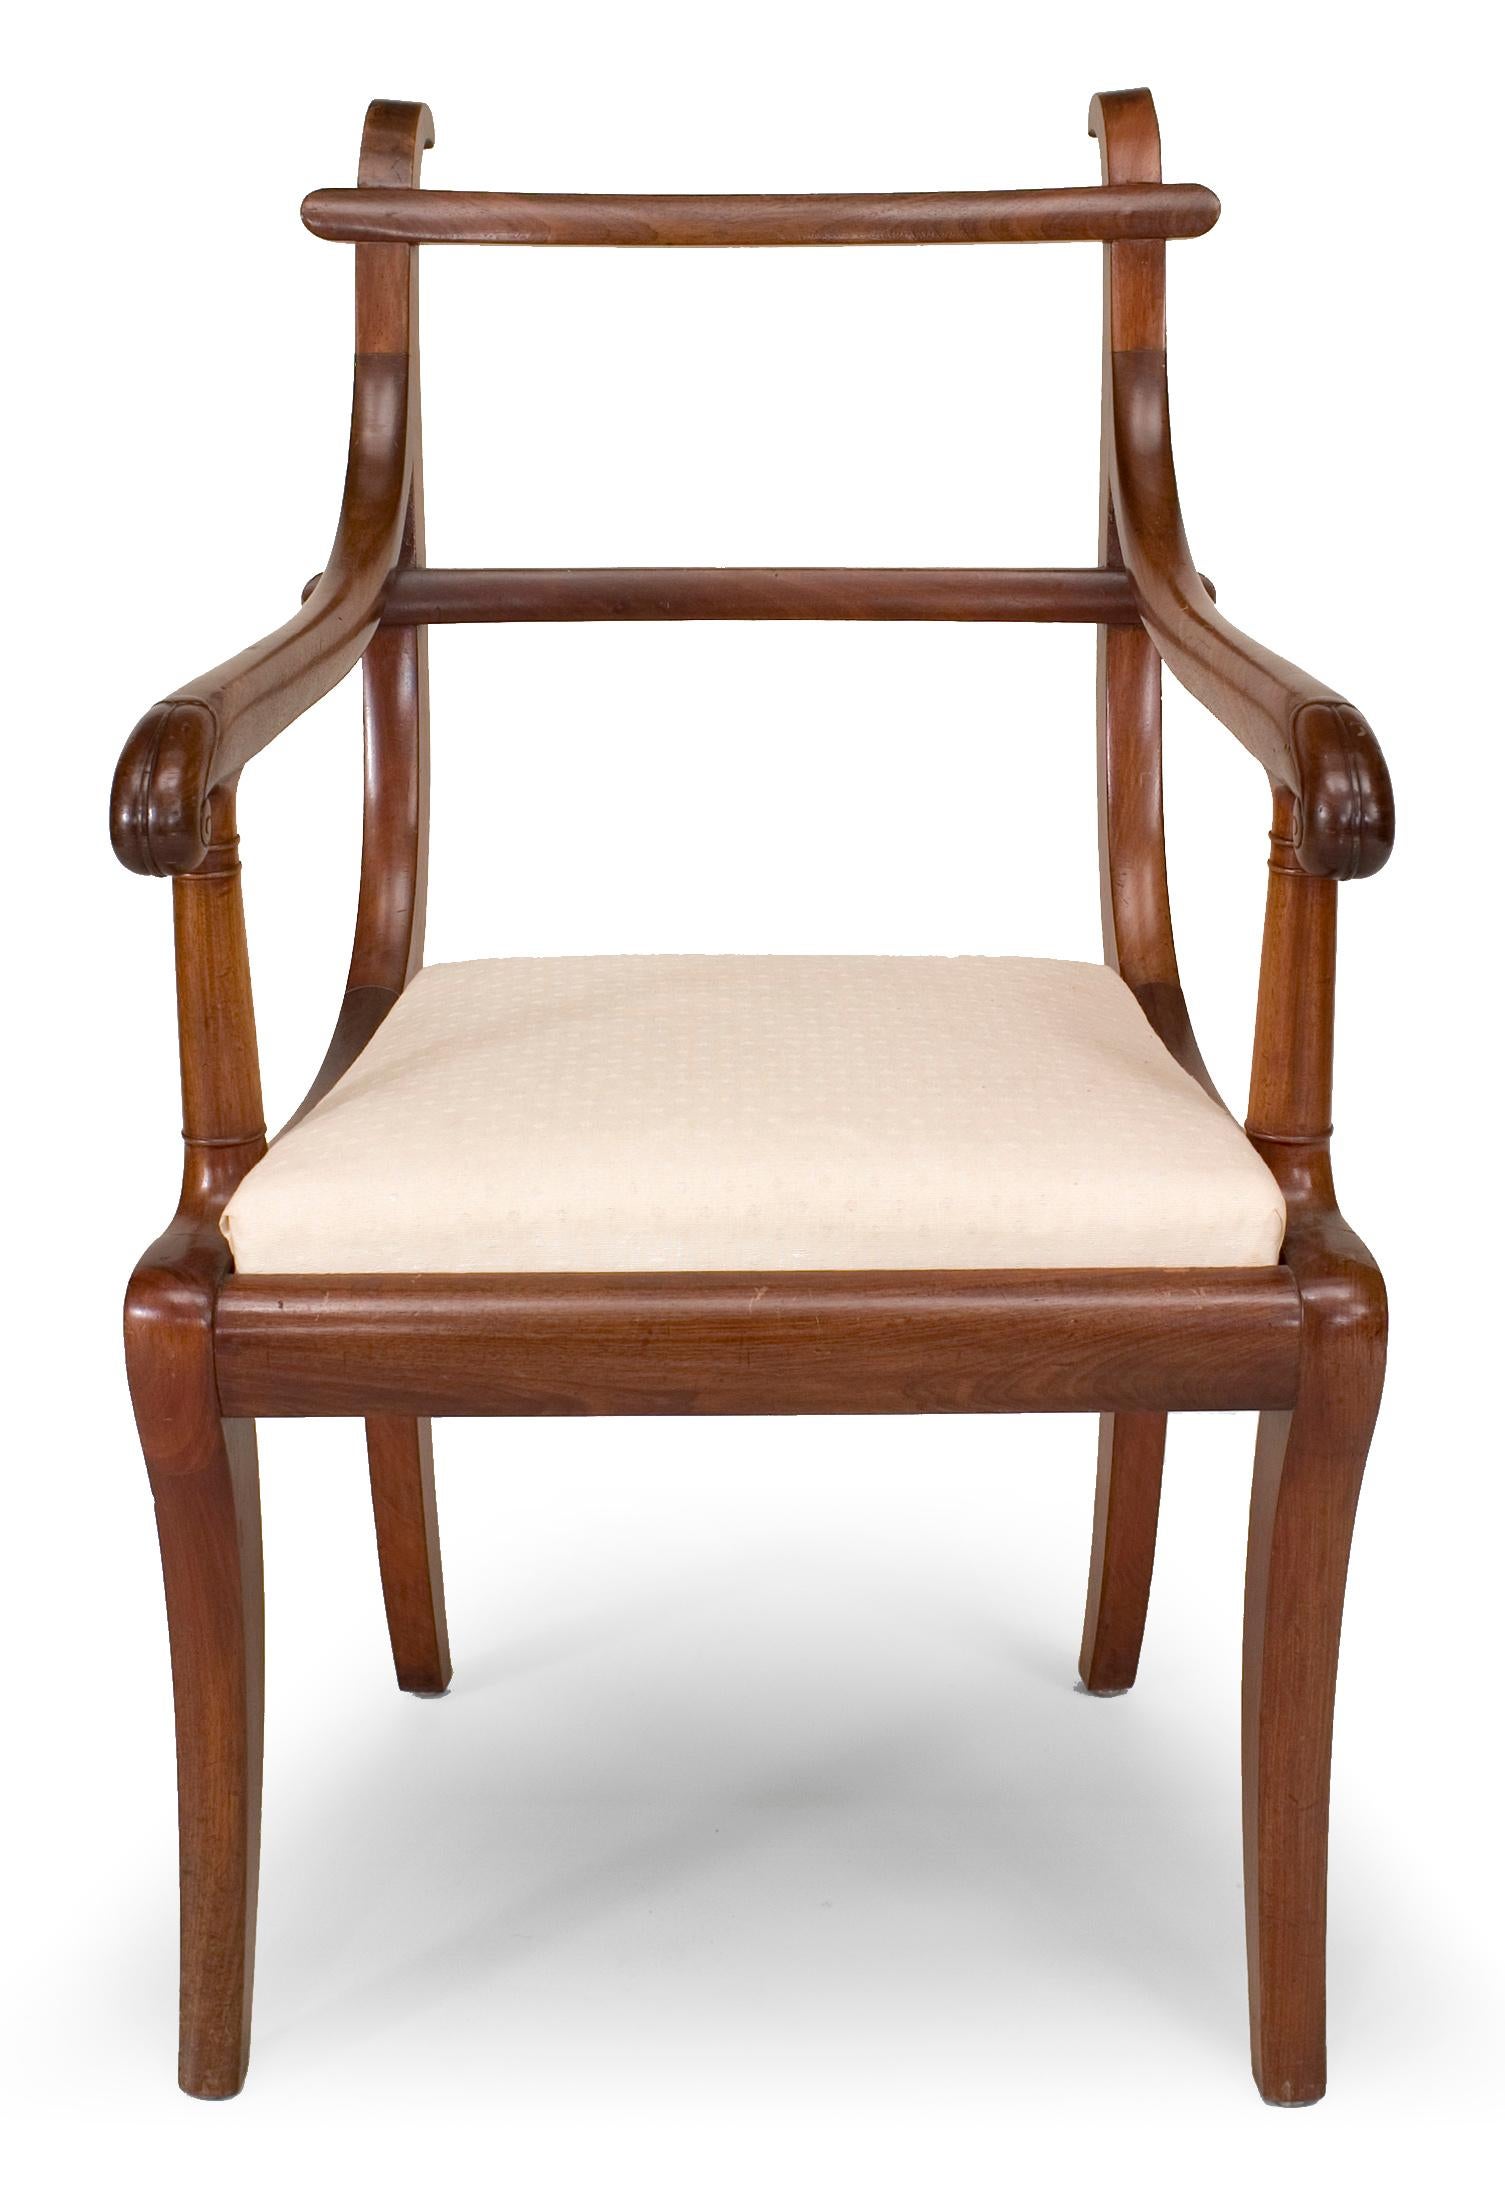 Pair of English Regency style (19th century) provincial mahogany ladder back arm chairs with slip seat.